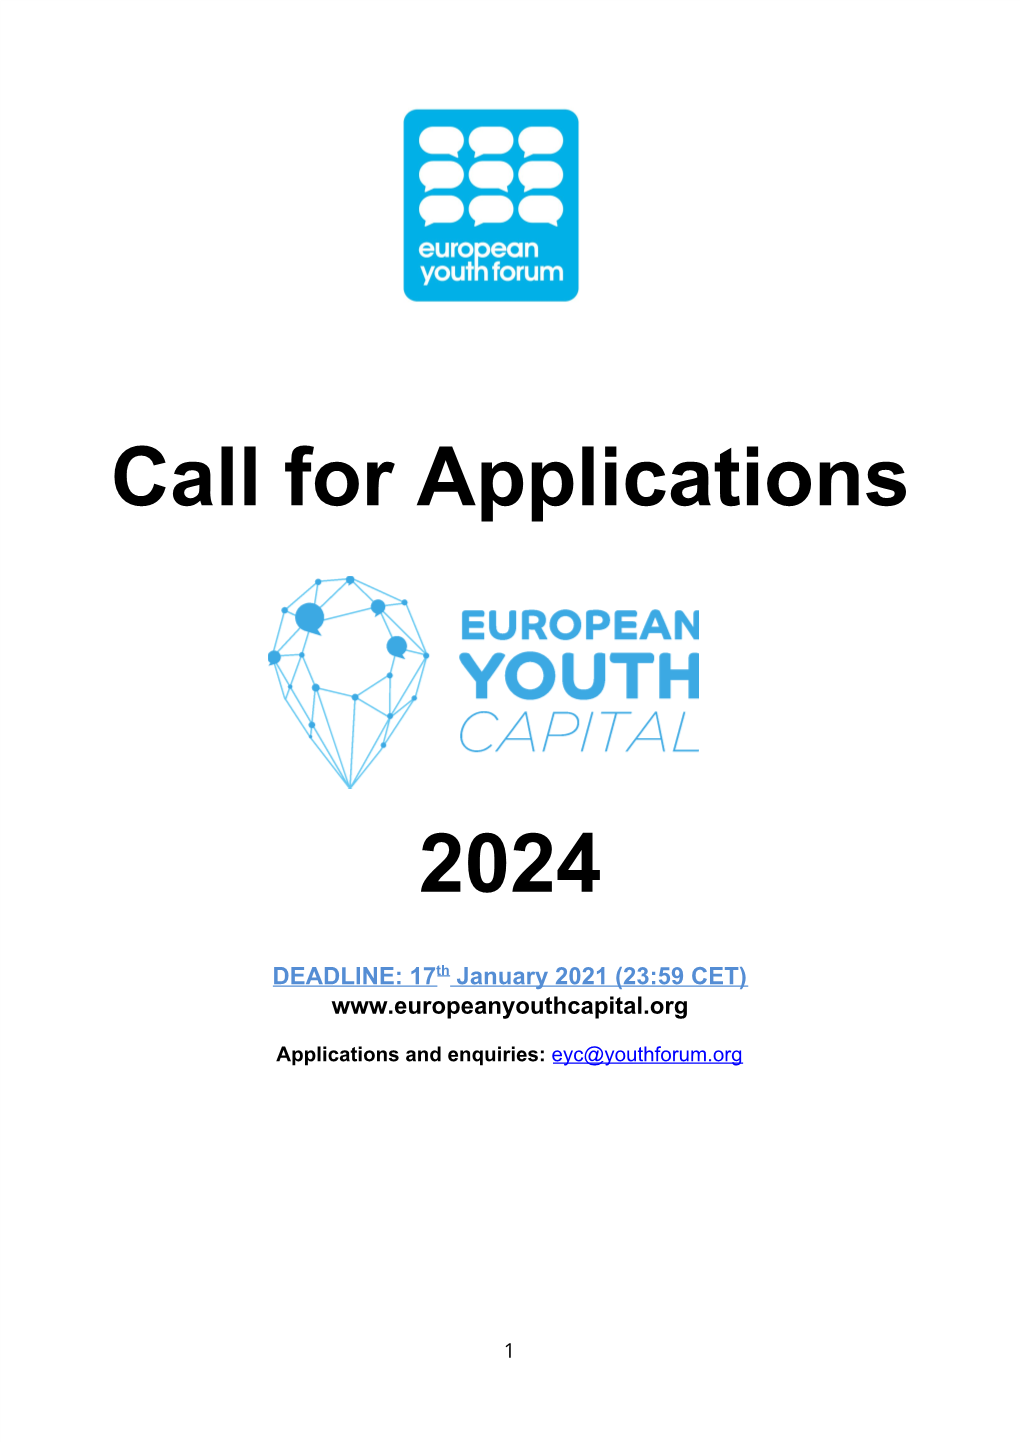 Call for Applications 2024